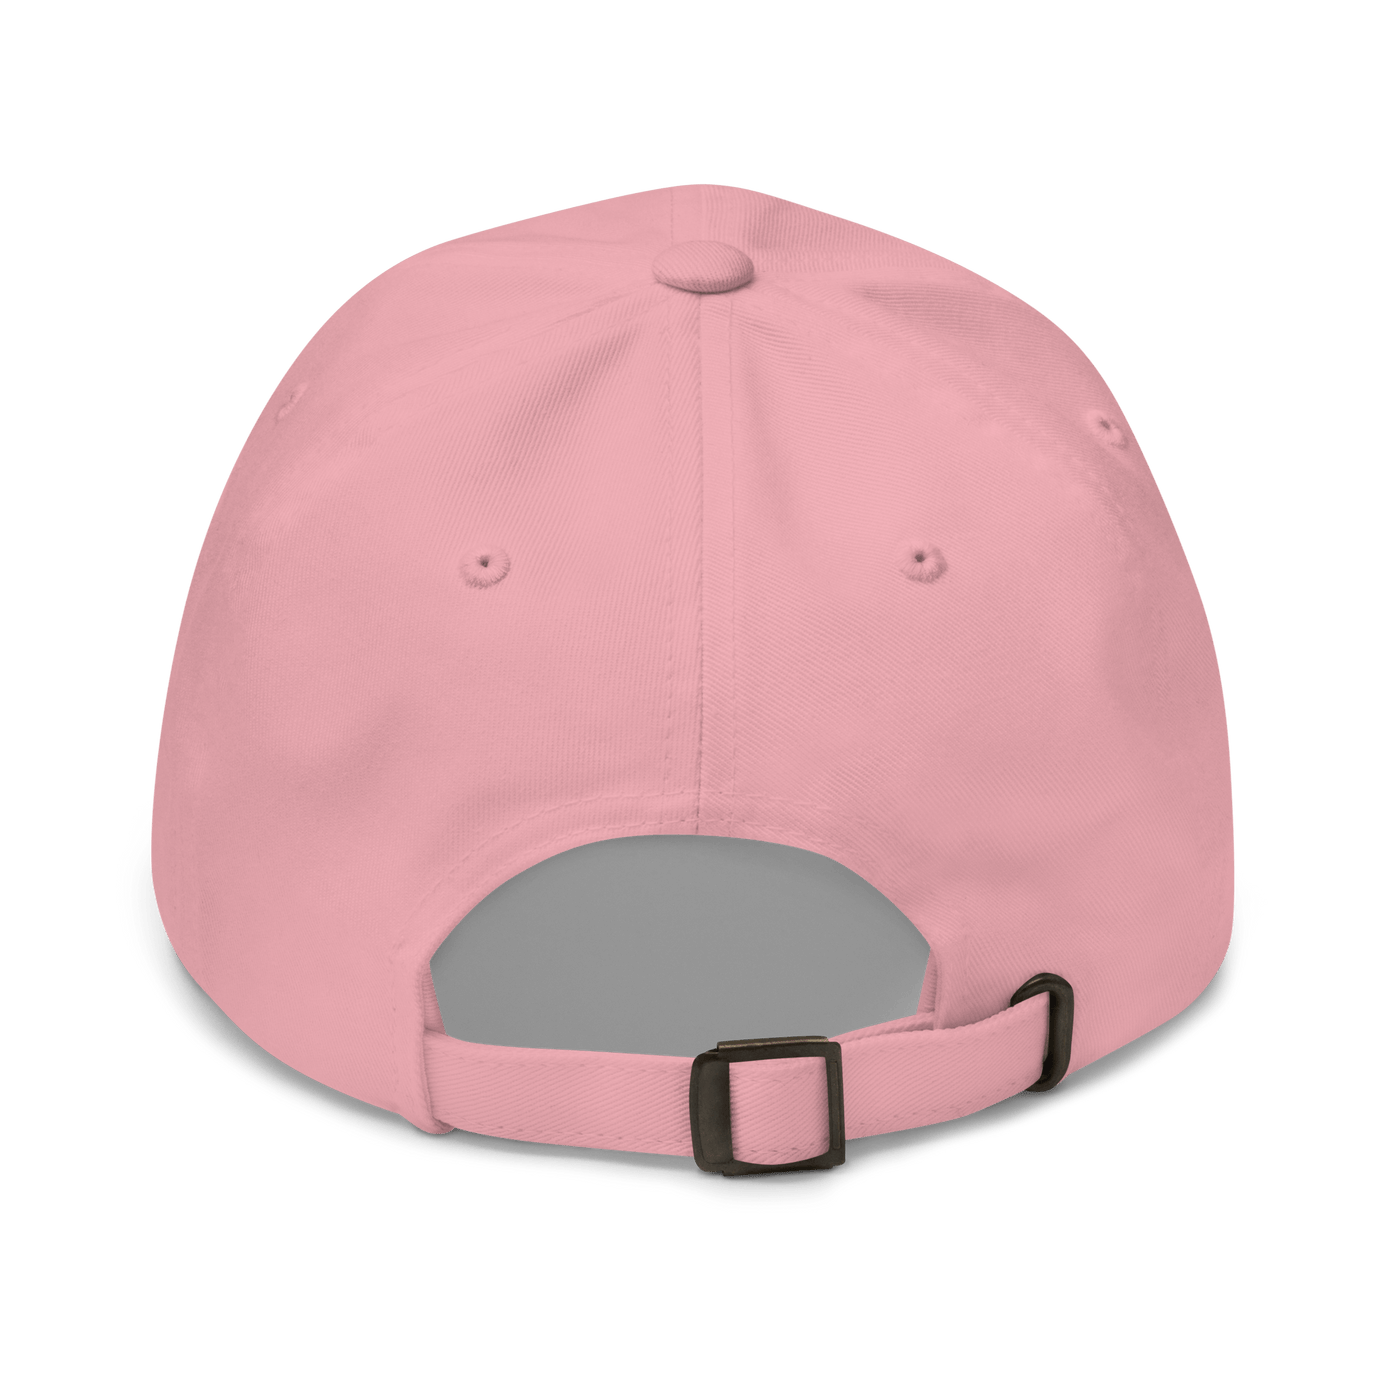 Fish & Chips Dad hat - Pink - - Just Another Cap Store